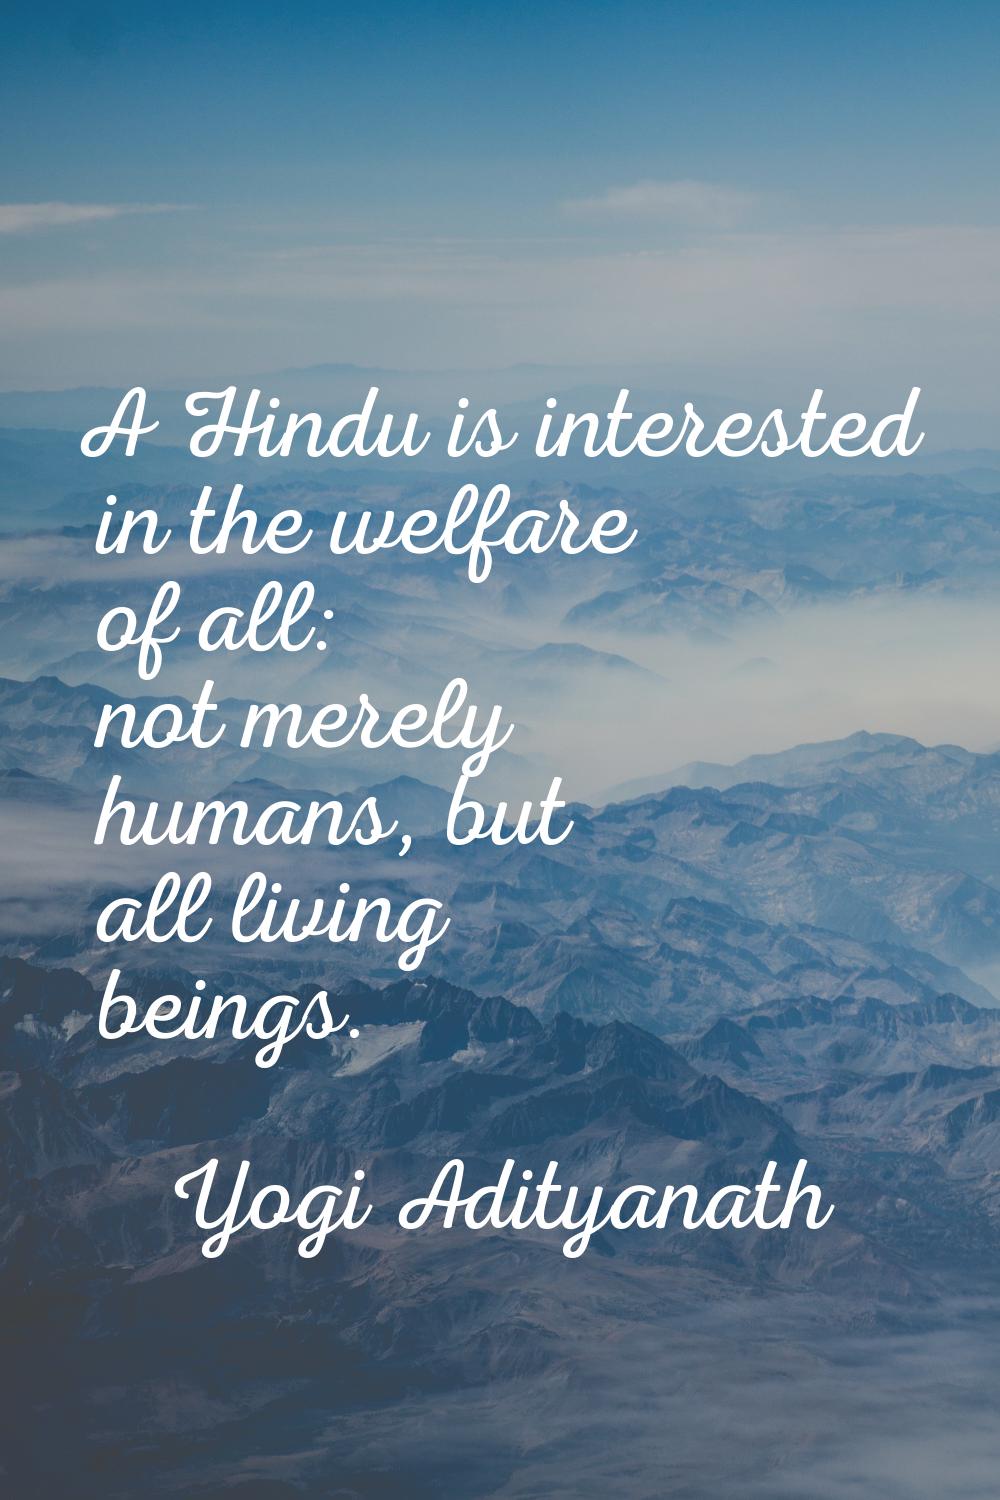 A Hindu is interested in the welfare of all: not merely humans, but all living beings.